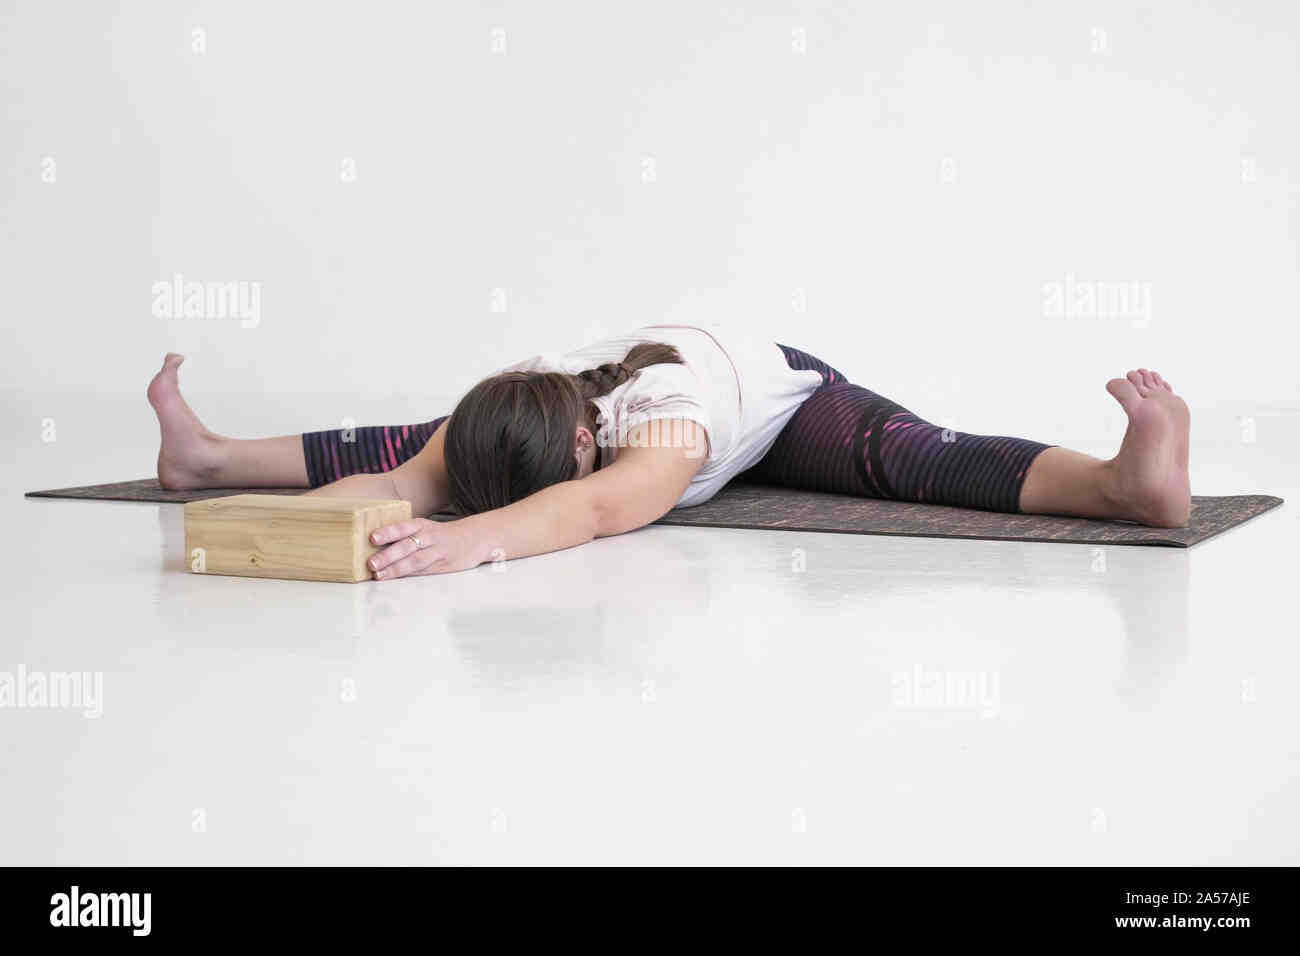 What are the benefits of the wide angle forward bend yoga pose?